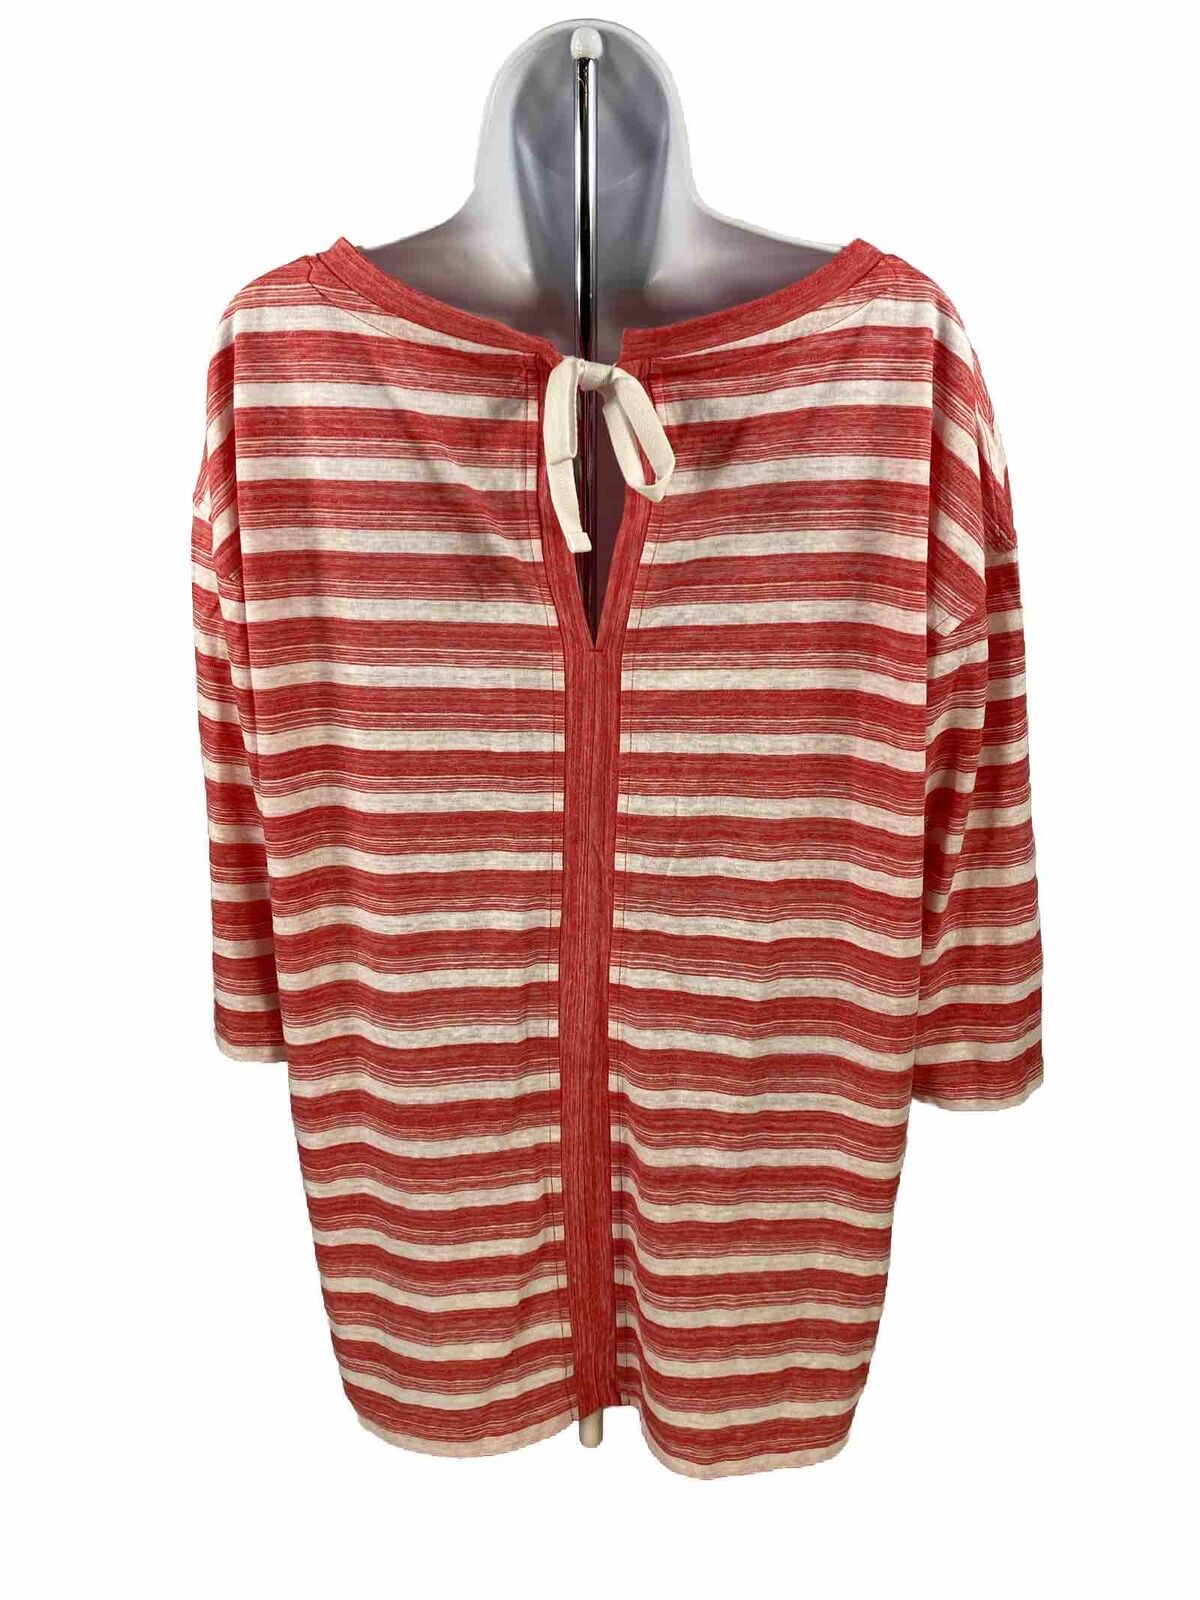 NEW Talbot's Women's Red Striped Tie Back Short Sleeve Shirt - Plus 1X